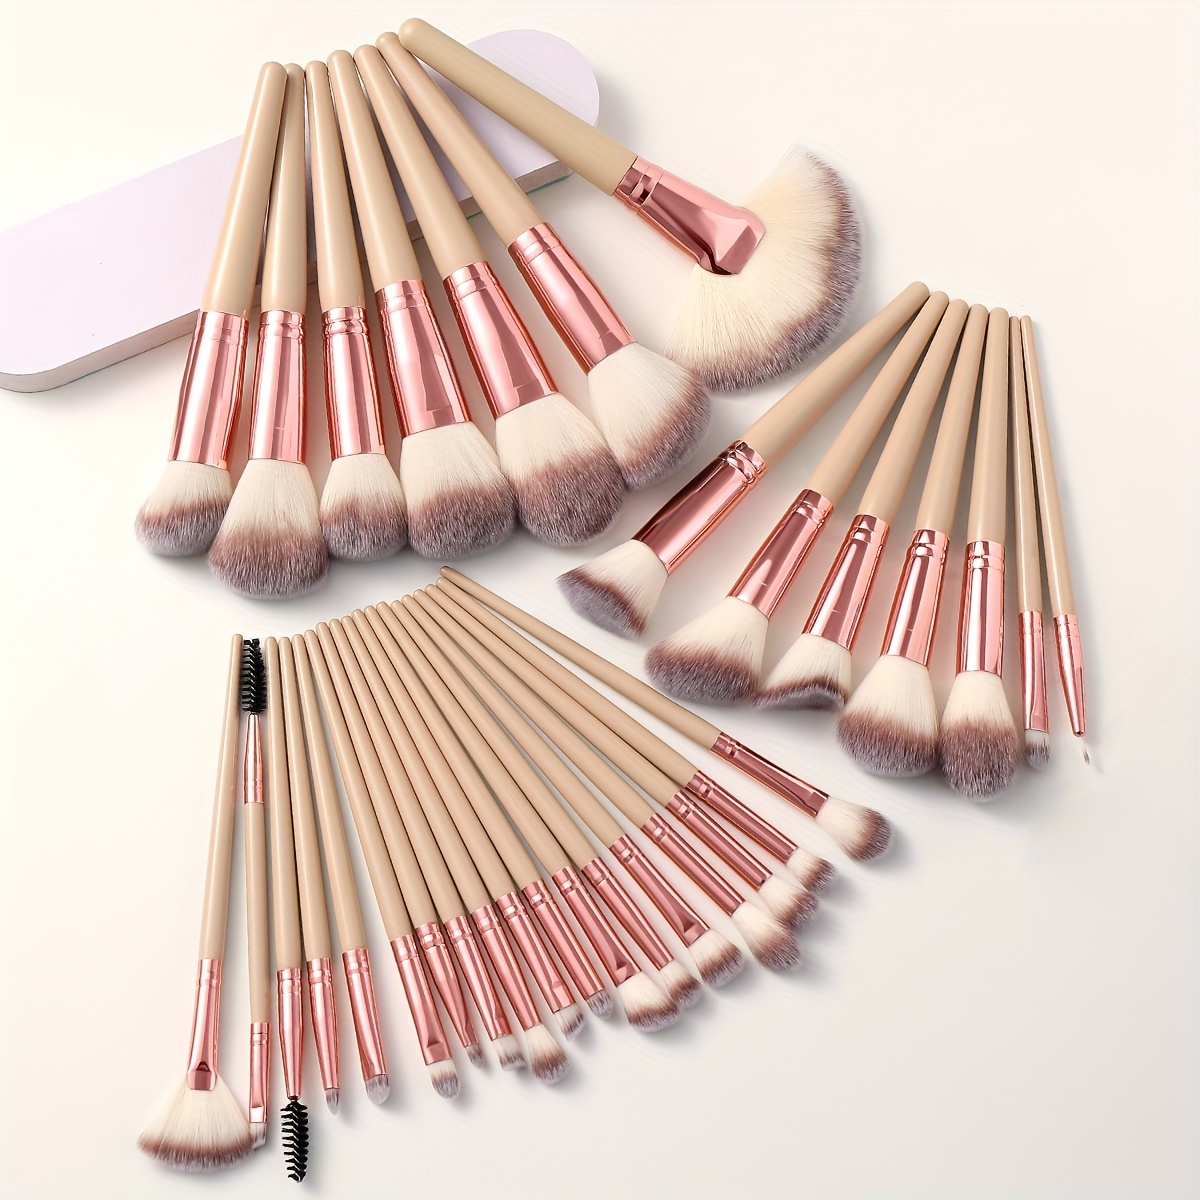 

15-32pcs/set Makeup Brush Kit, Convenient And Practical For Foundation, Blush, Eyeshadow, Eyebrow, Contour, Lip, Nose, Face Cosmetic Tools